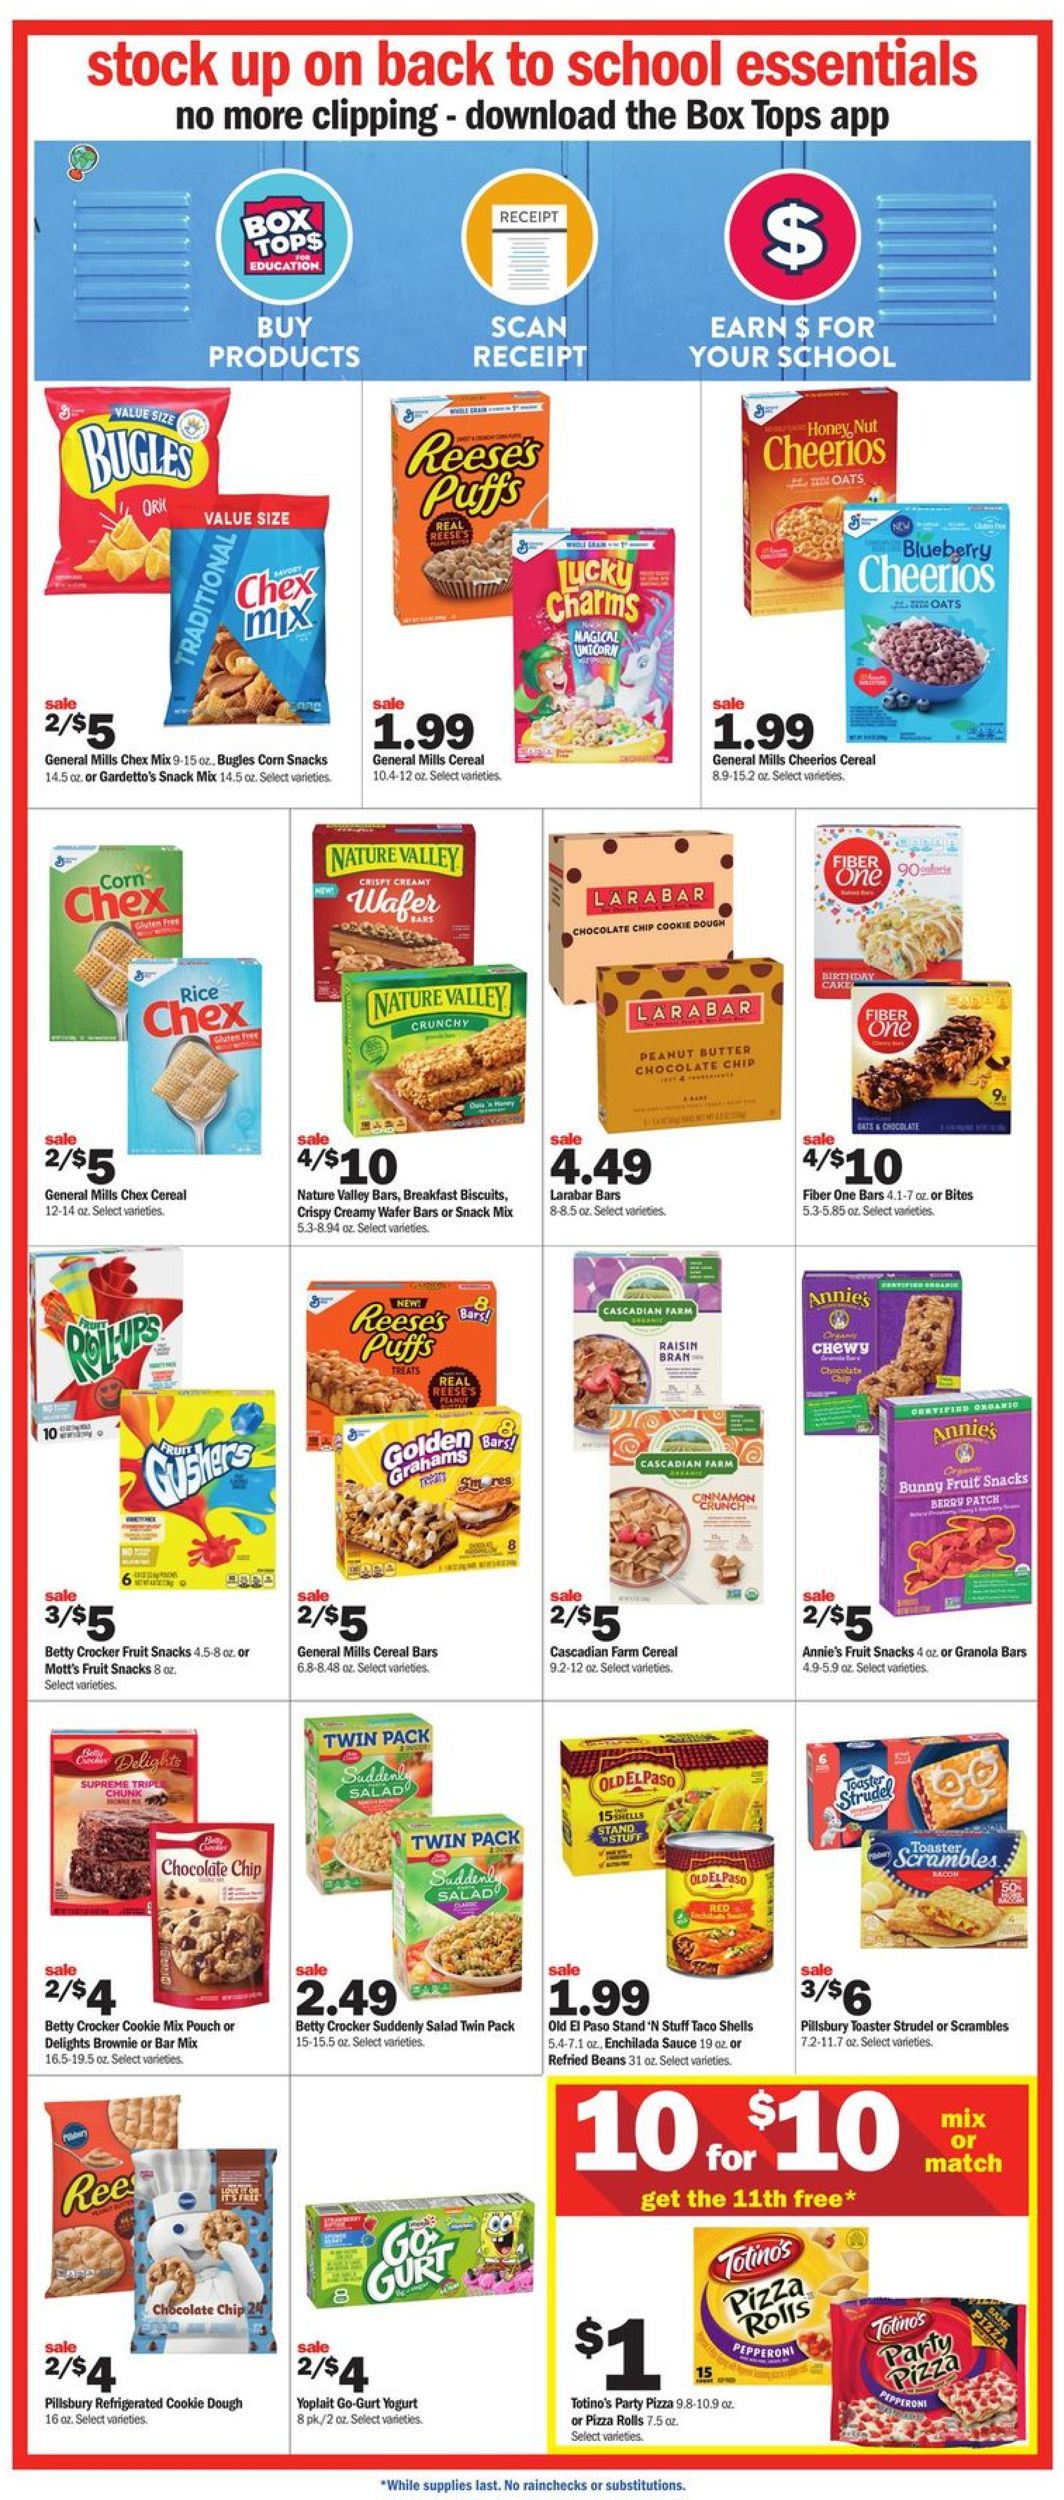 Meijer Current weekly ad 08/11 - 08/17/2019 [6] - frequent-ads.com